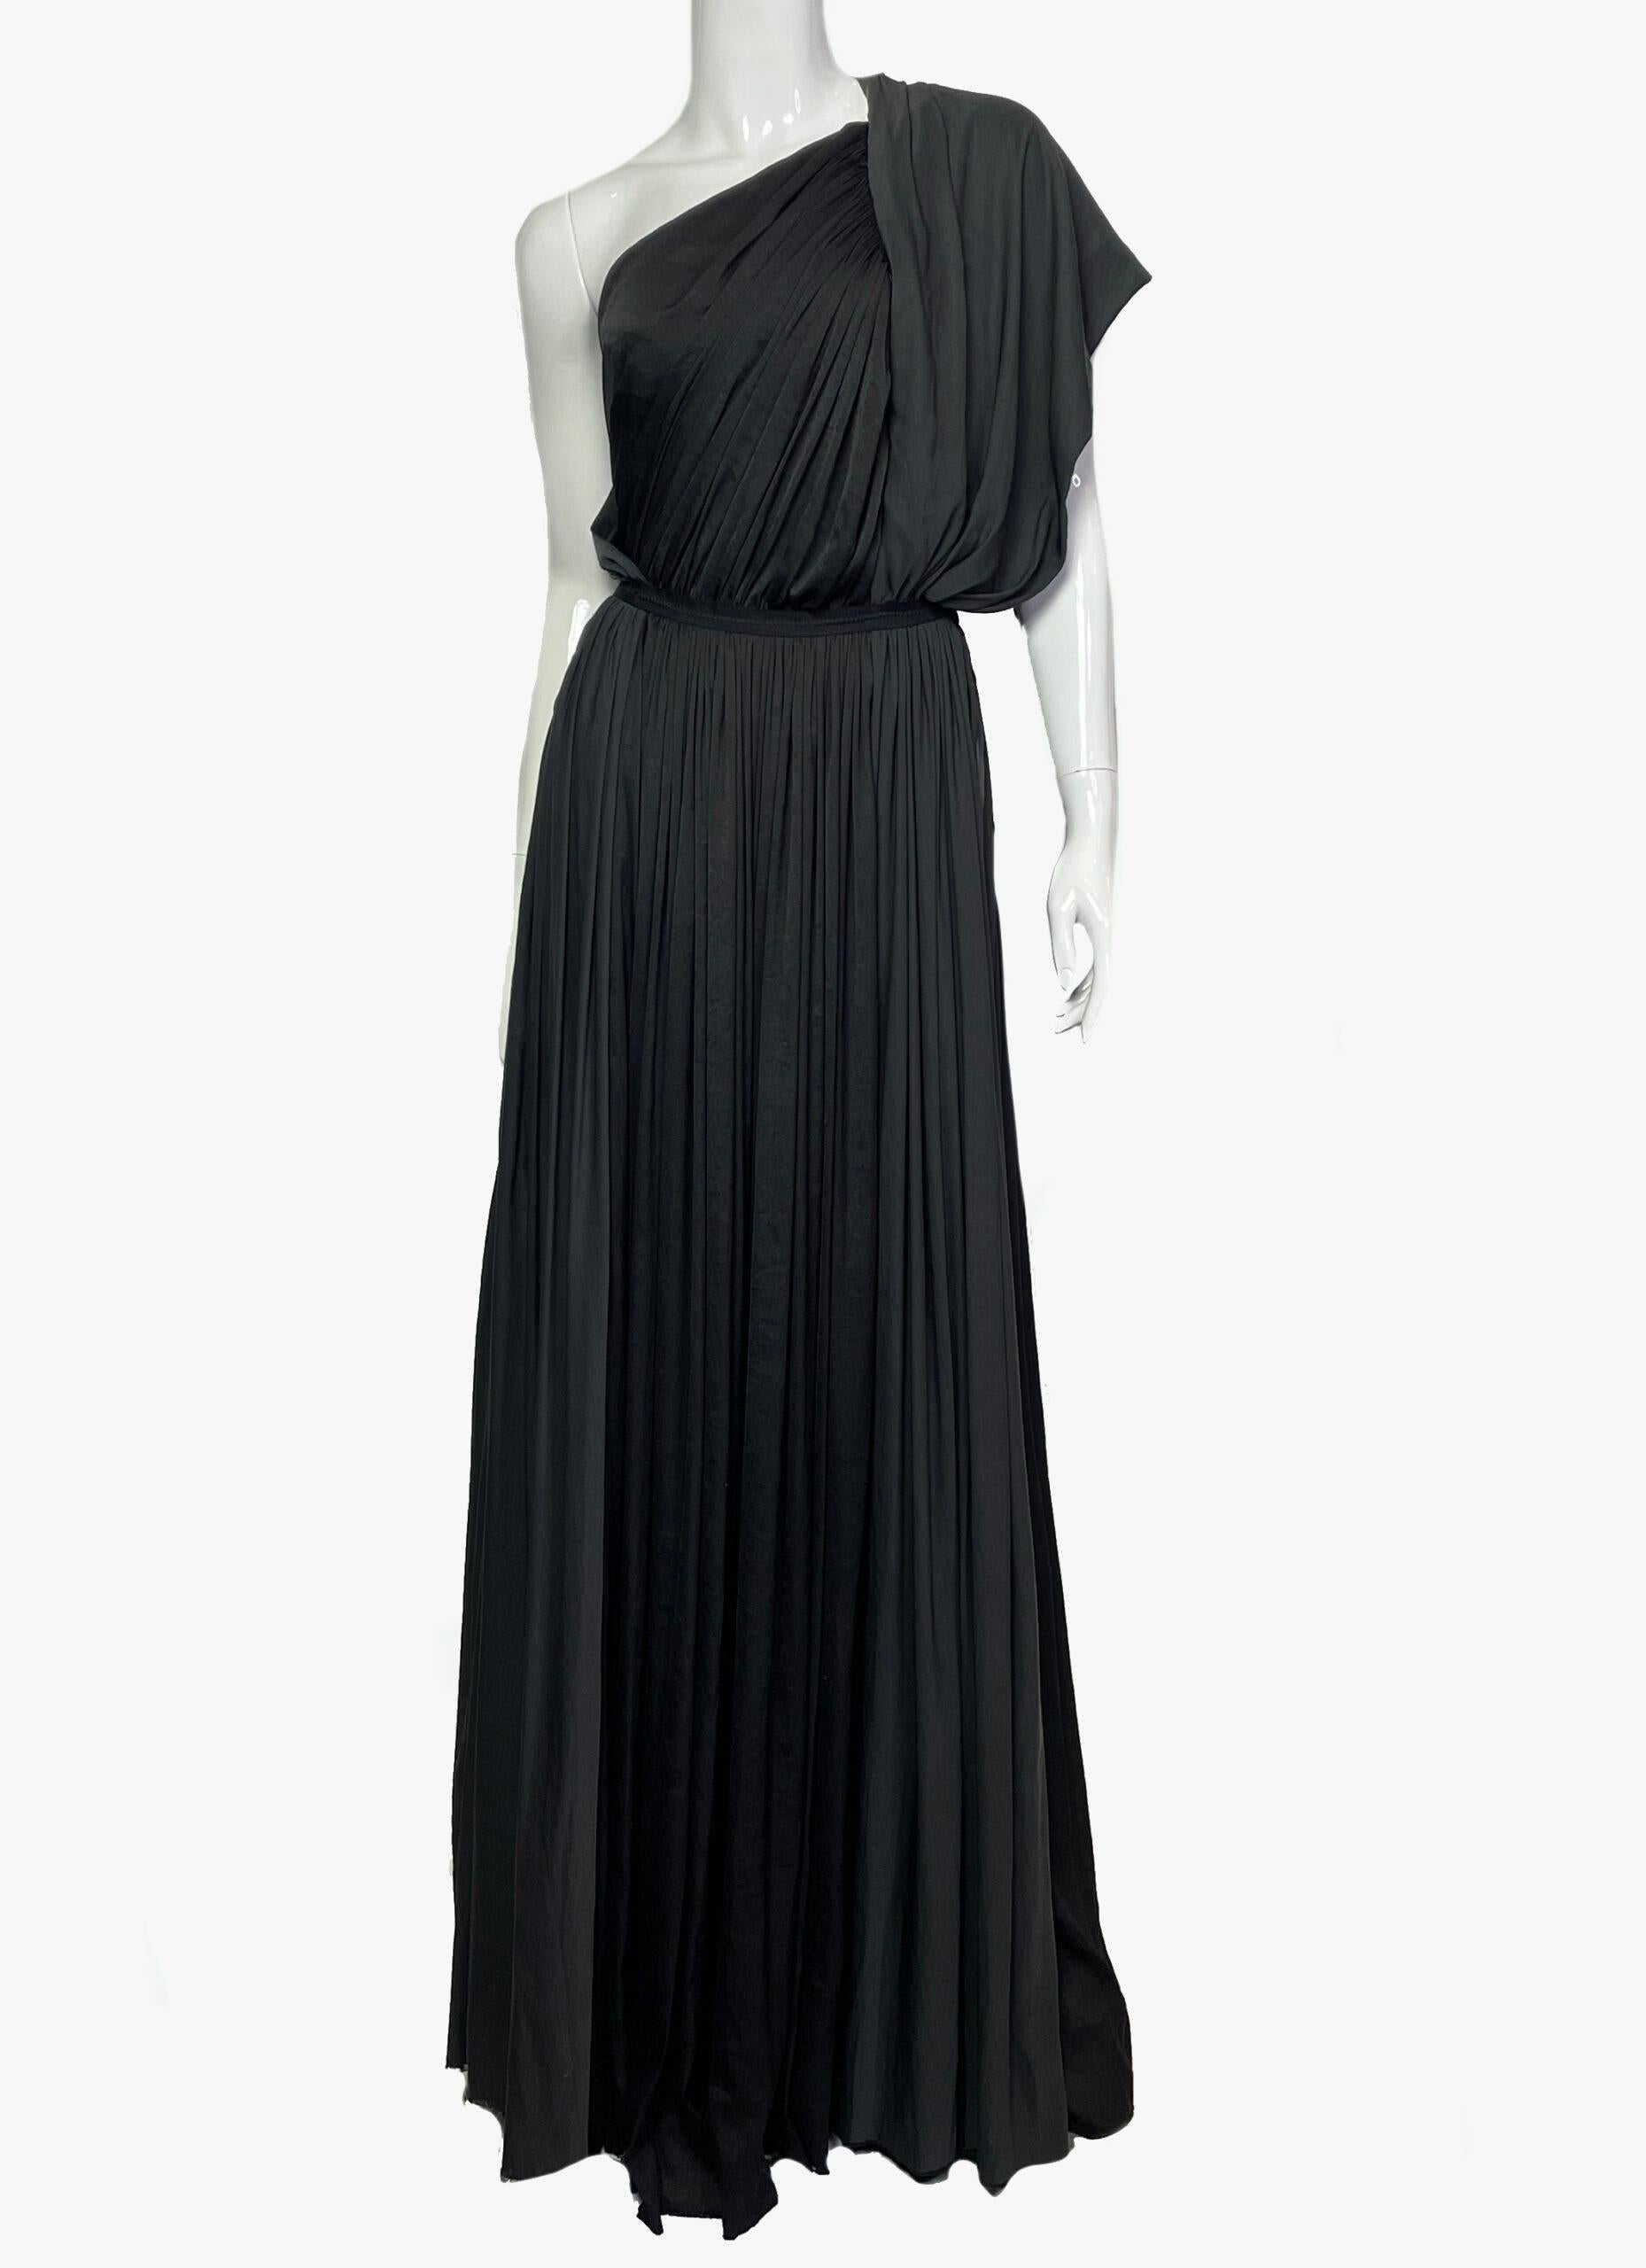 A stunning one-shoulder Lanvin gown with beautiful Greek-inspired drapery.

Collection 2011

Additional information:
Size: 36 FR (S-M)
Condition: Very good.

........Additional information ........

- Photo might be slightly different from actual